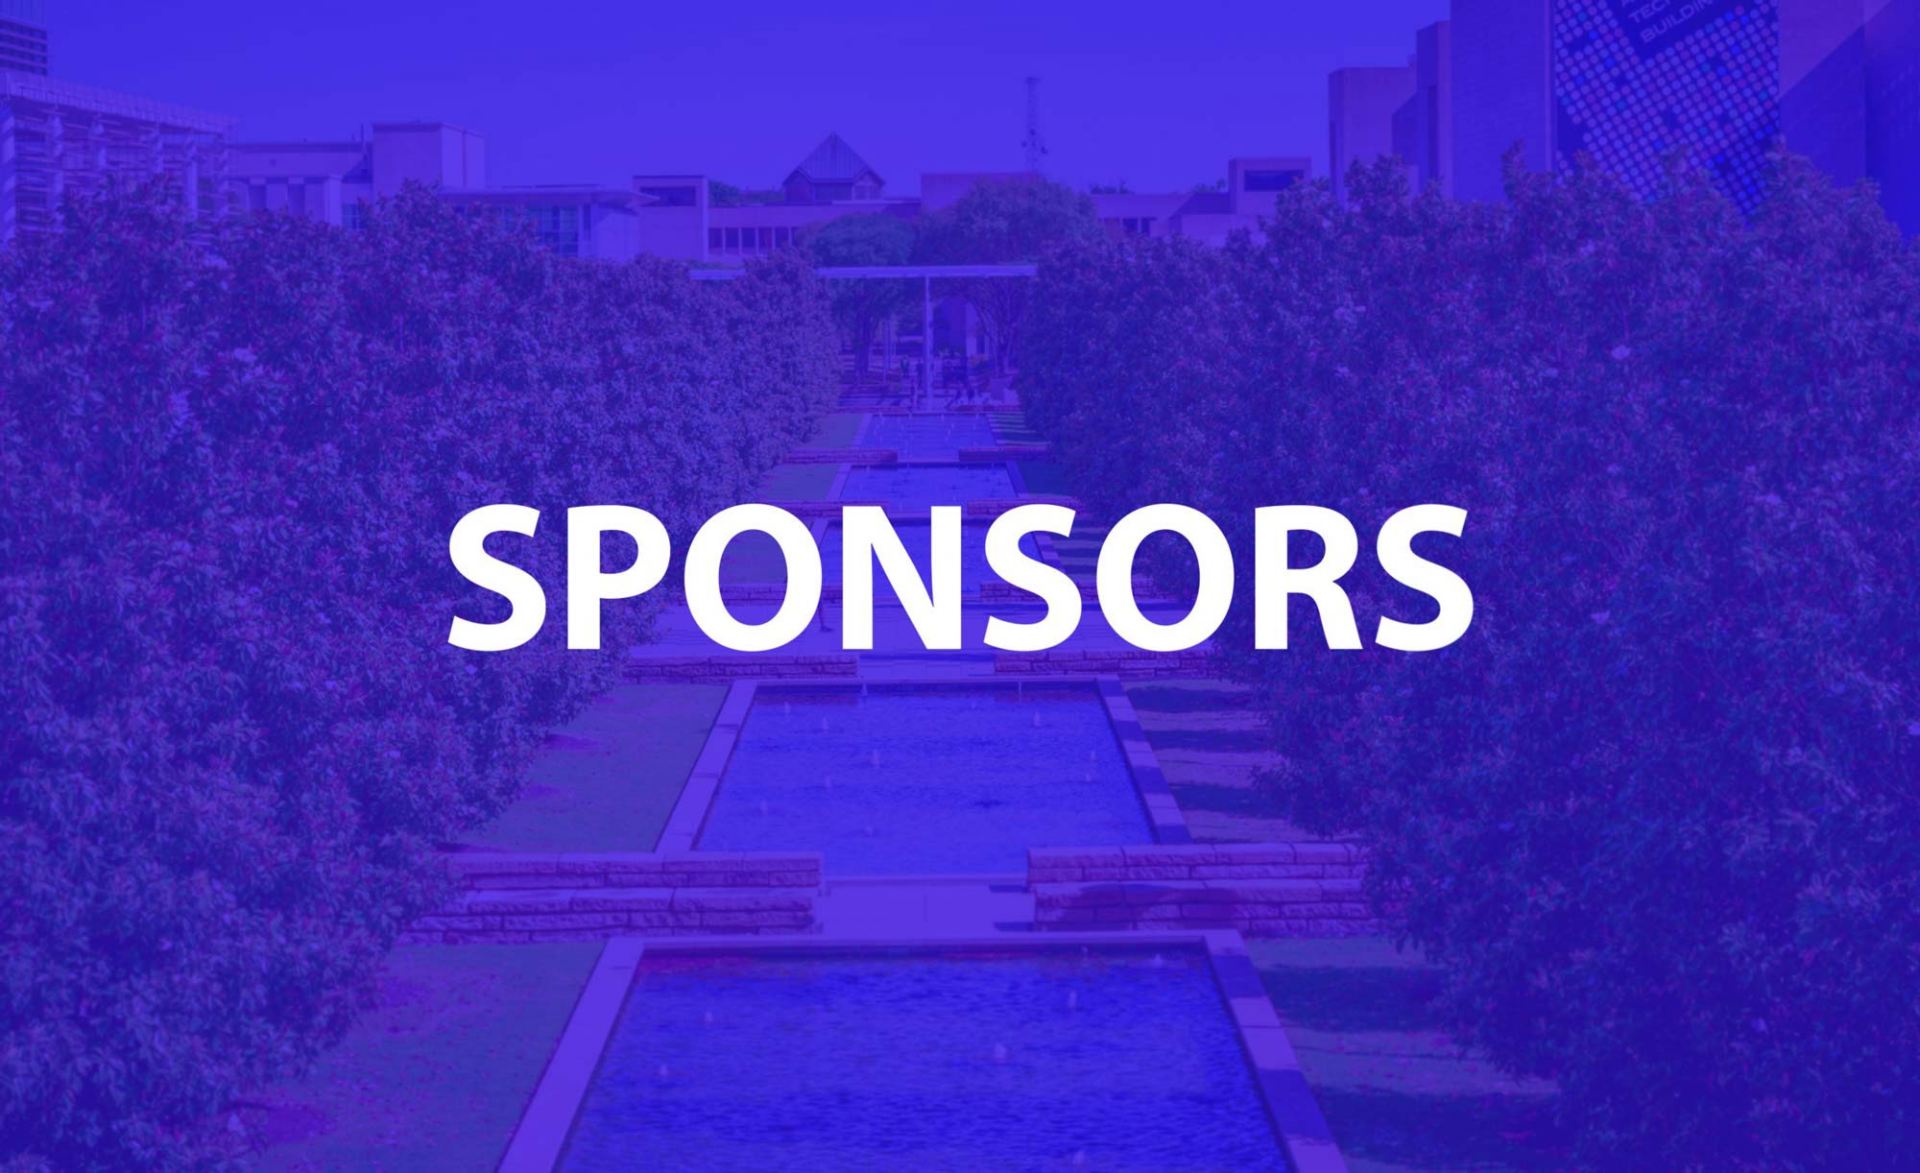 Sponsors of Center Point Symposium: The University of Texas at Dallas